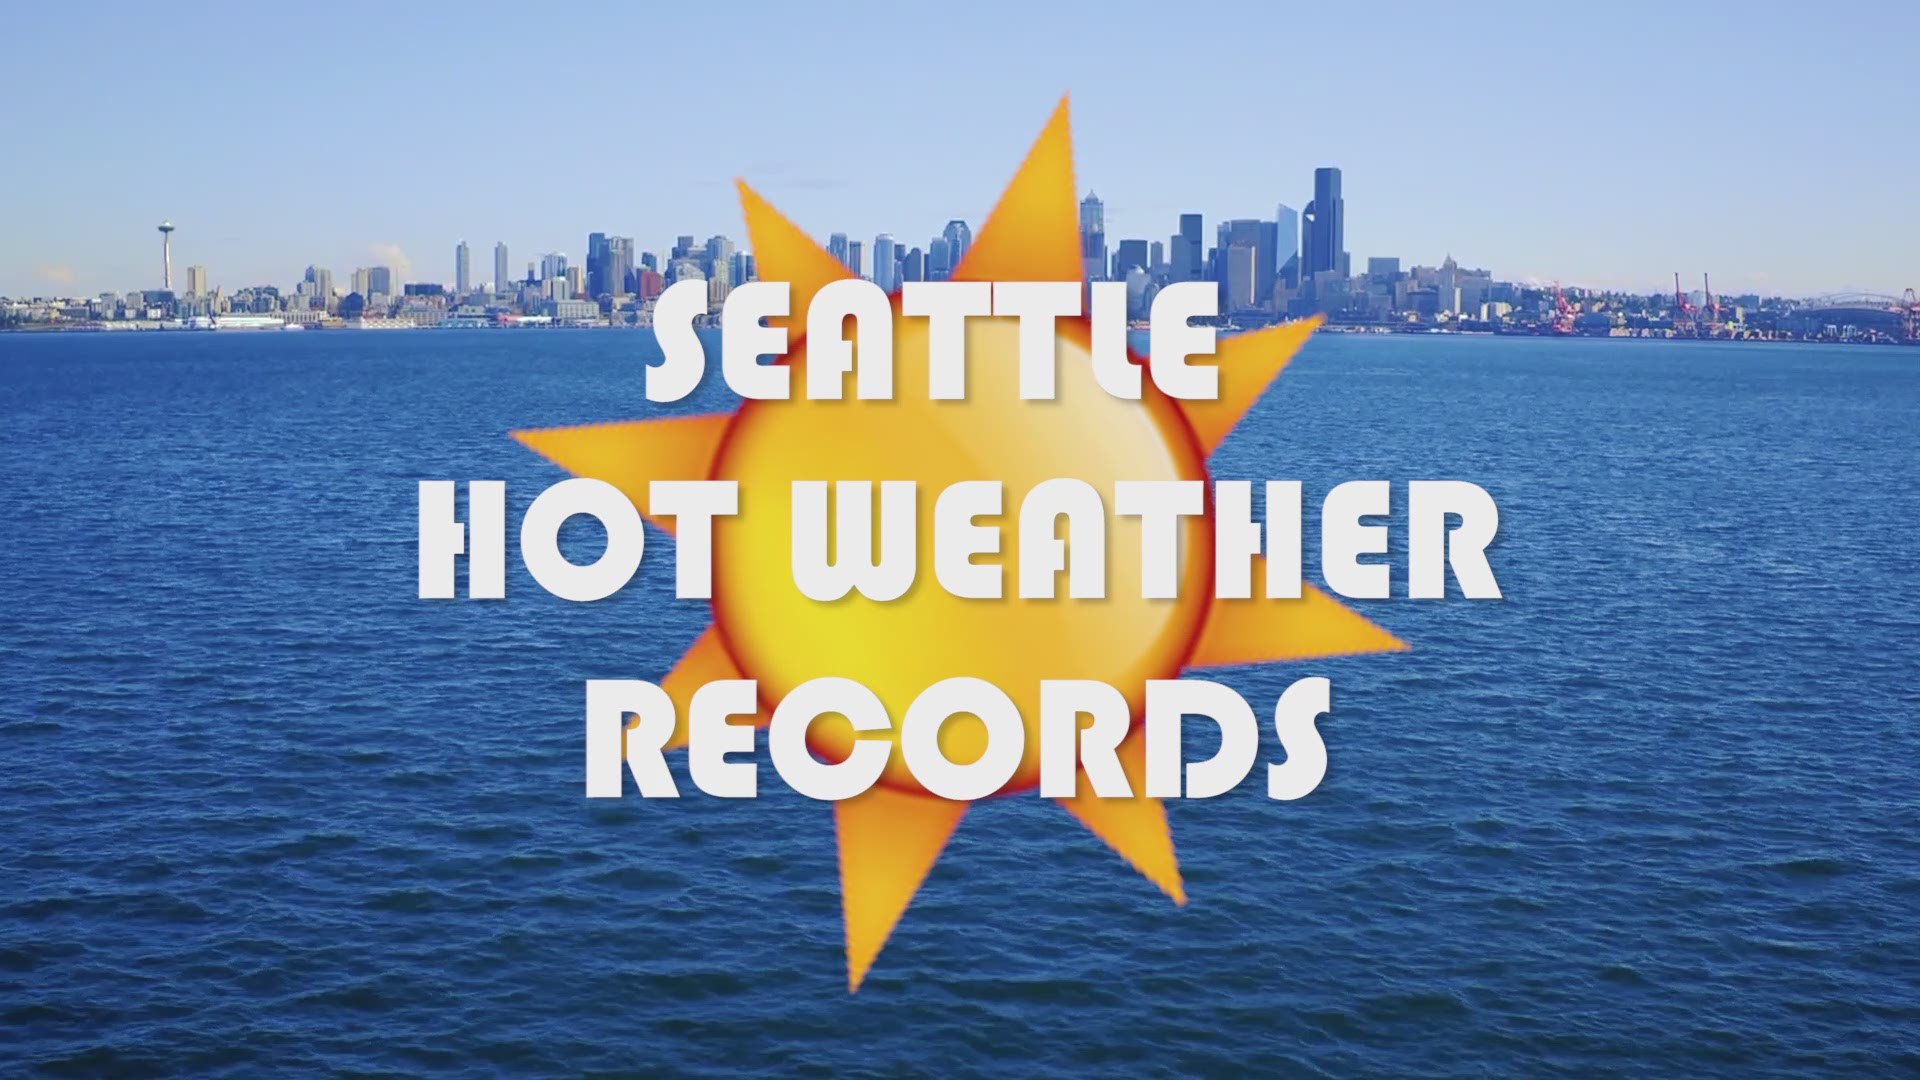 As the temperature rises in western Washington, here's a look at some hot weather records set in Seattle.